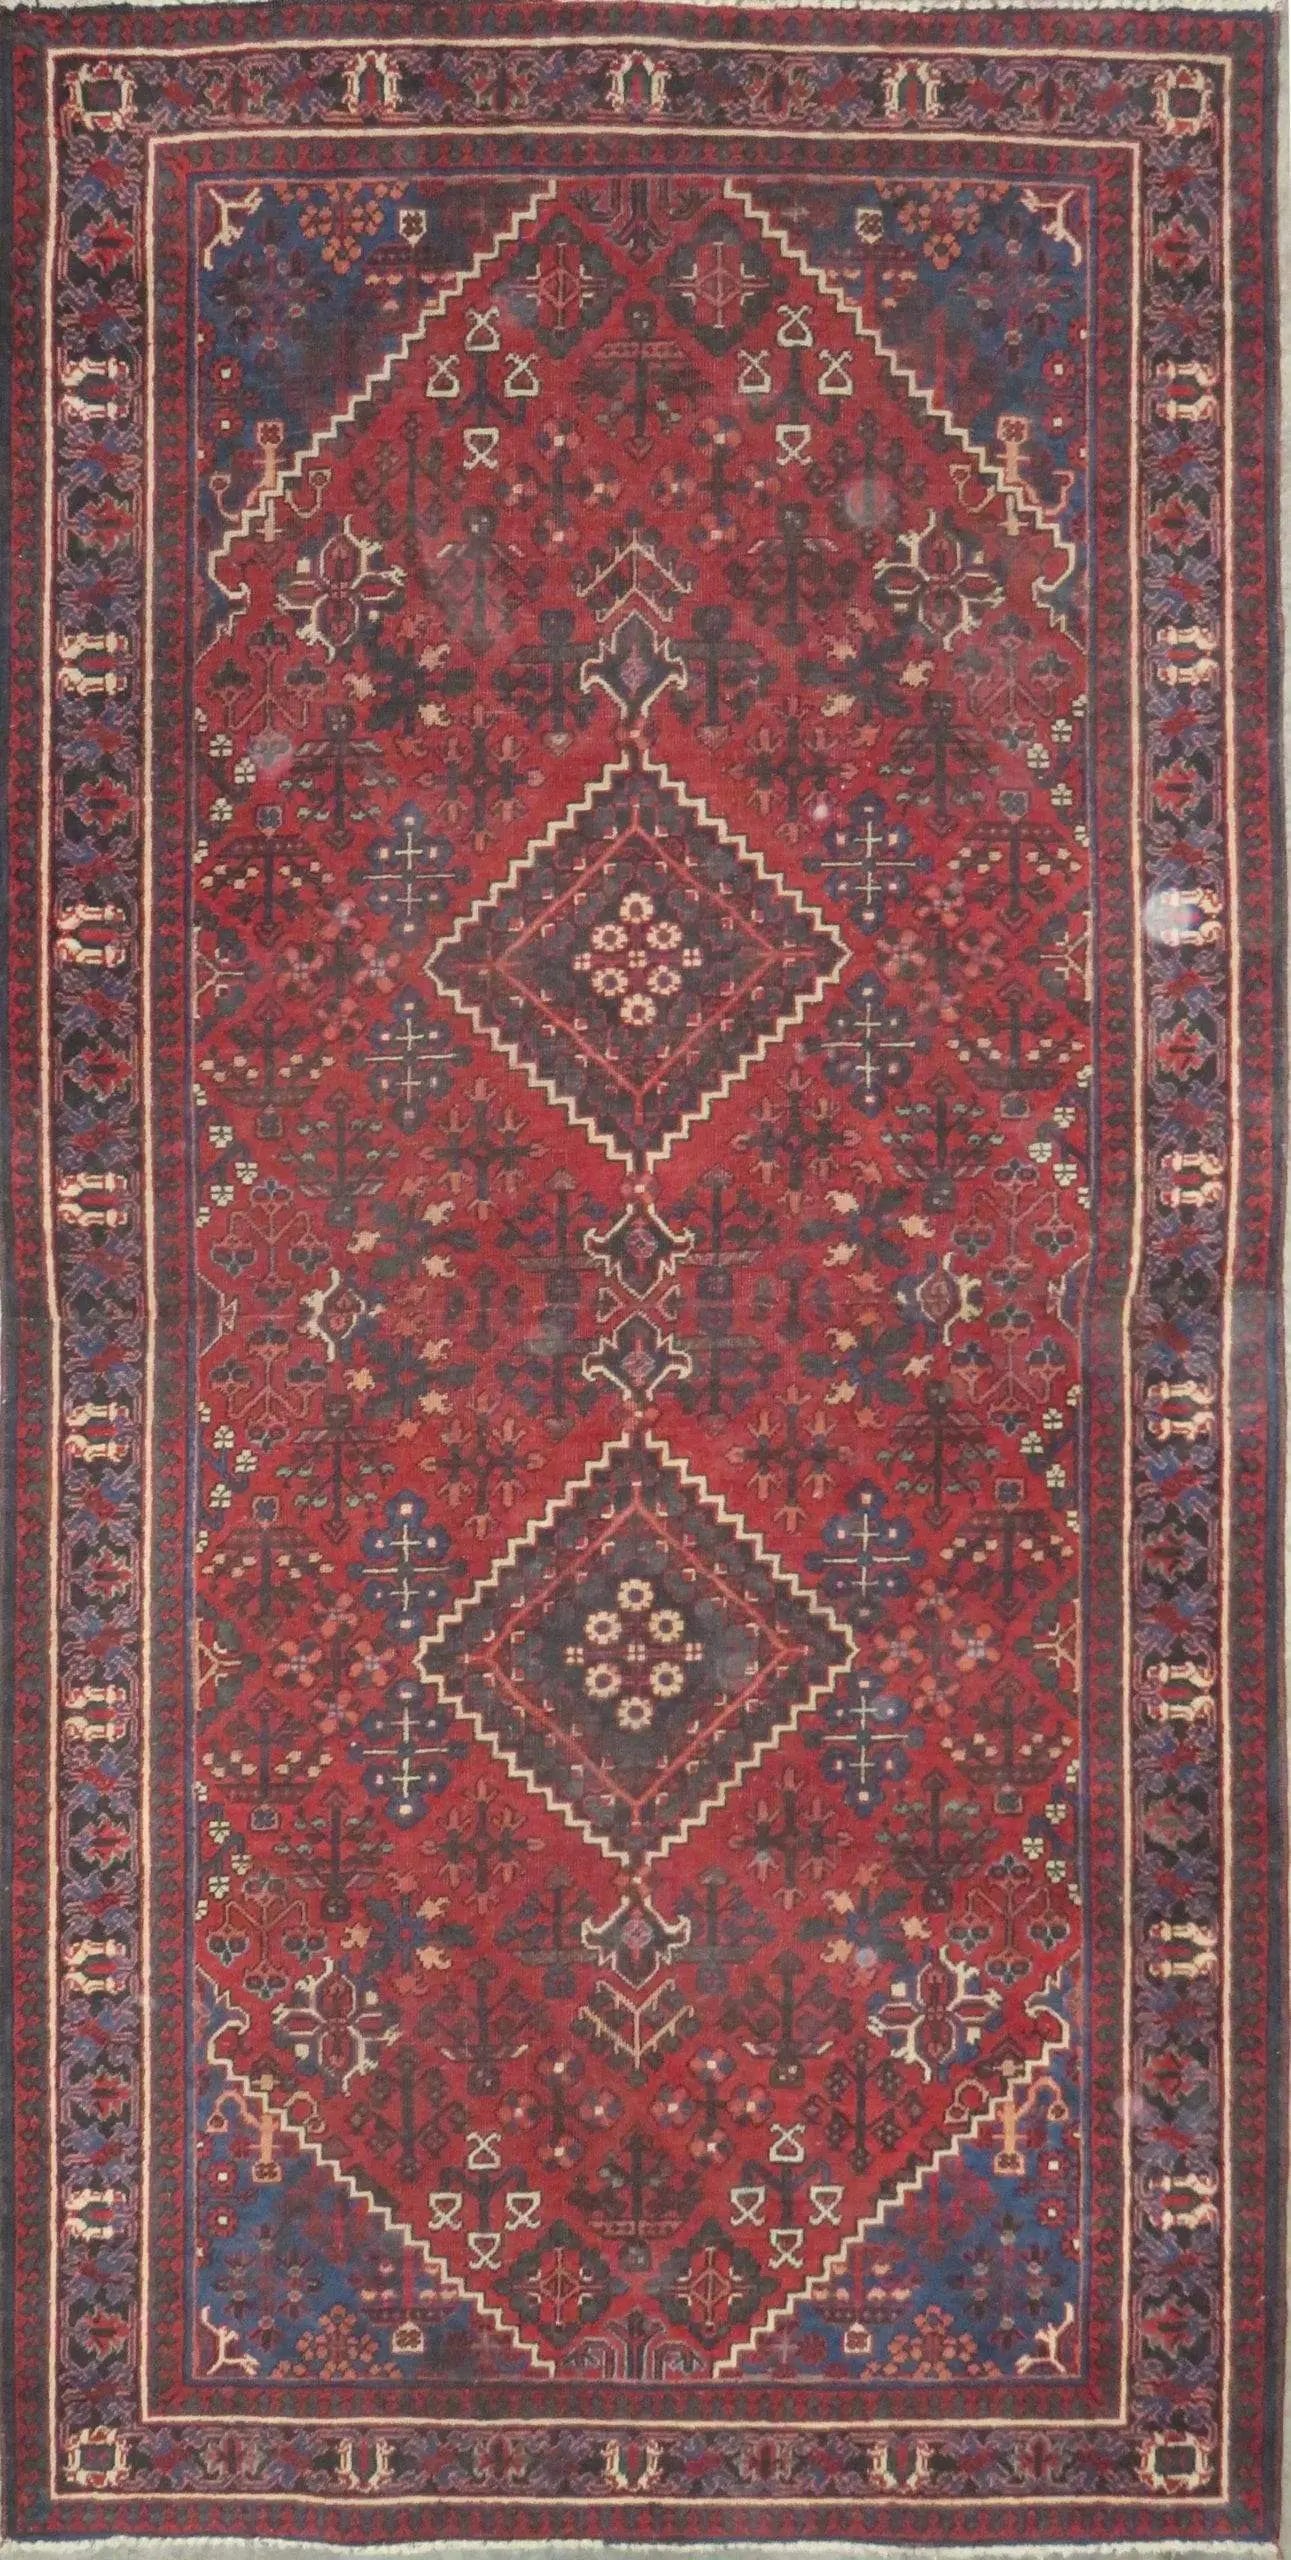 Hand-Knotted Persian Wool Rug _ Luxurious Vintage Design, 10'4" x 3'7", Artisan Crafted